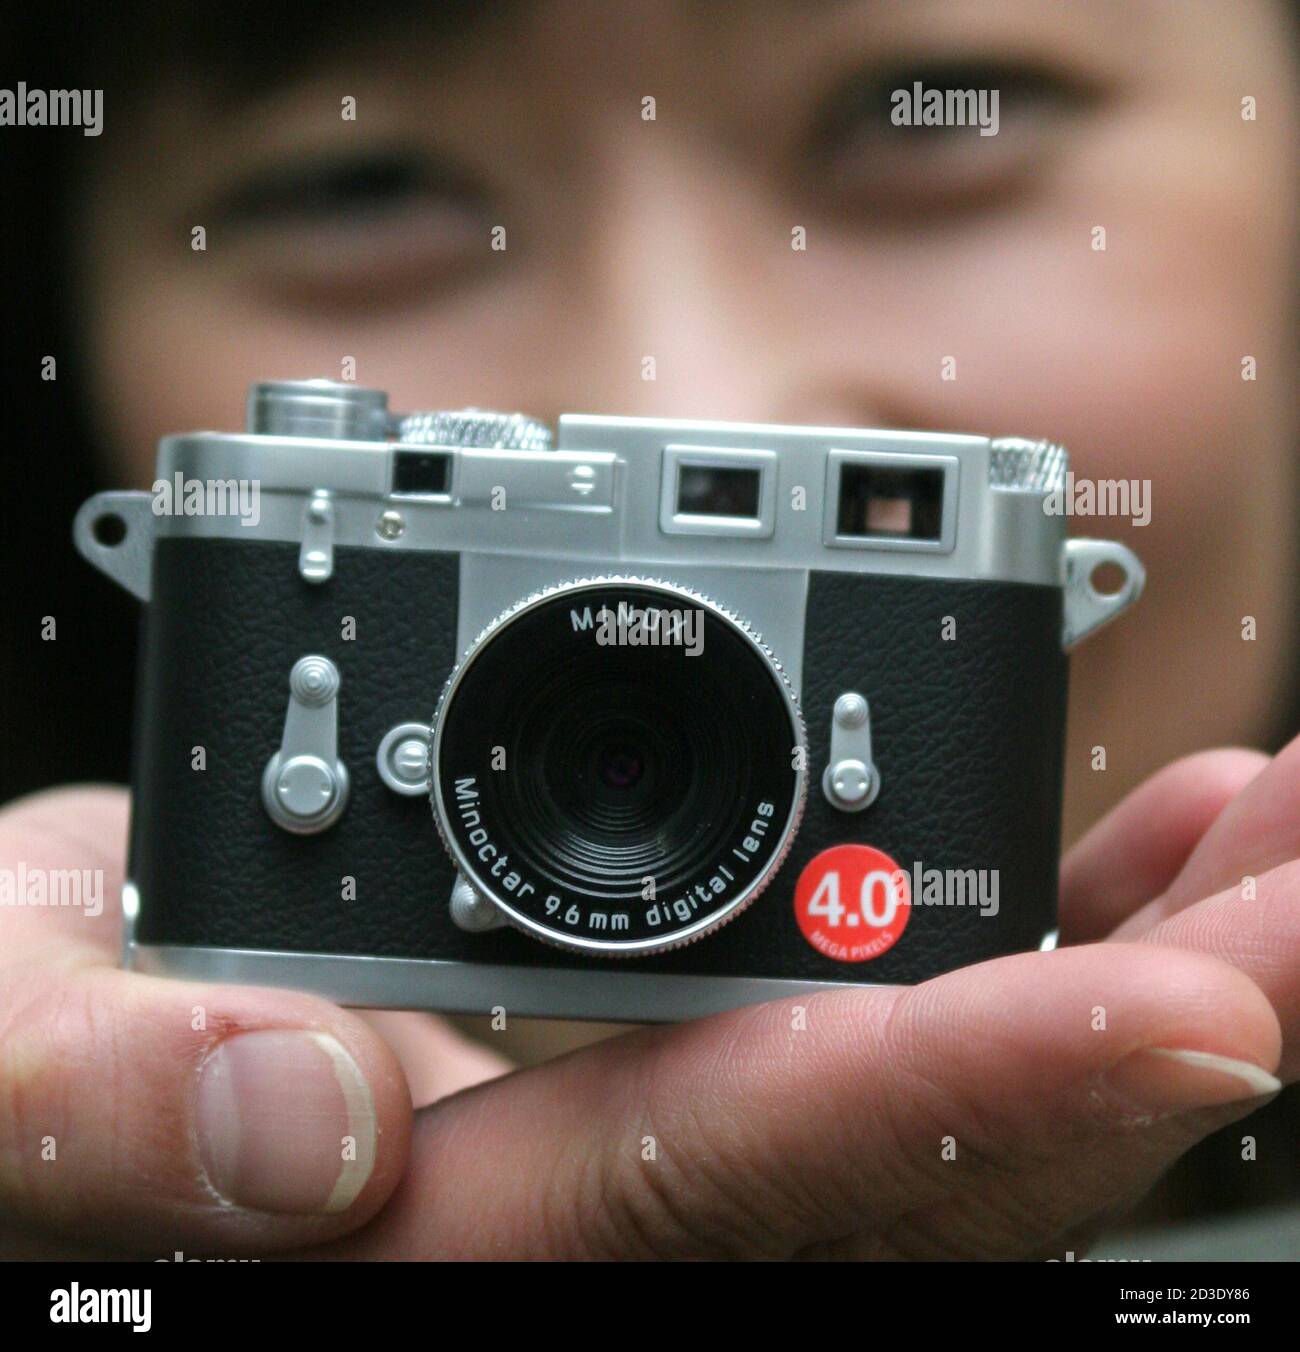 A Japanese woman shows the Minox miniature Leica M3 replica digital camera  in Tokyo February 23, 2005. Weighing only 95g (about 0.21lbs), the 4.0  megapixel digital camera can record up to 99